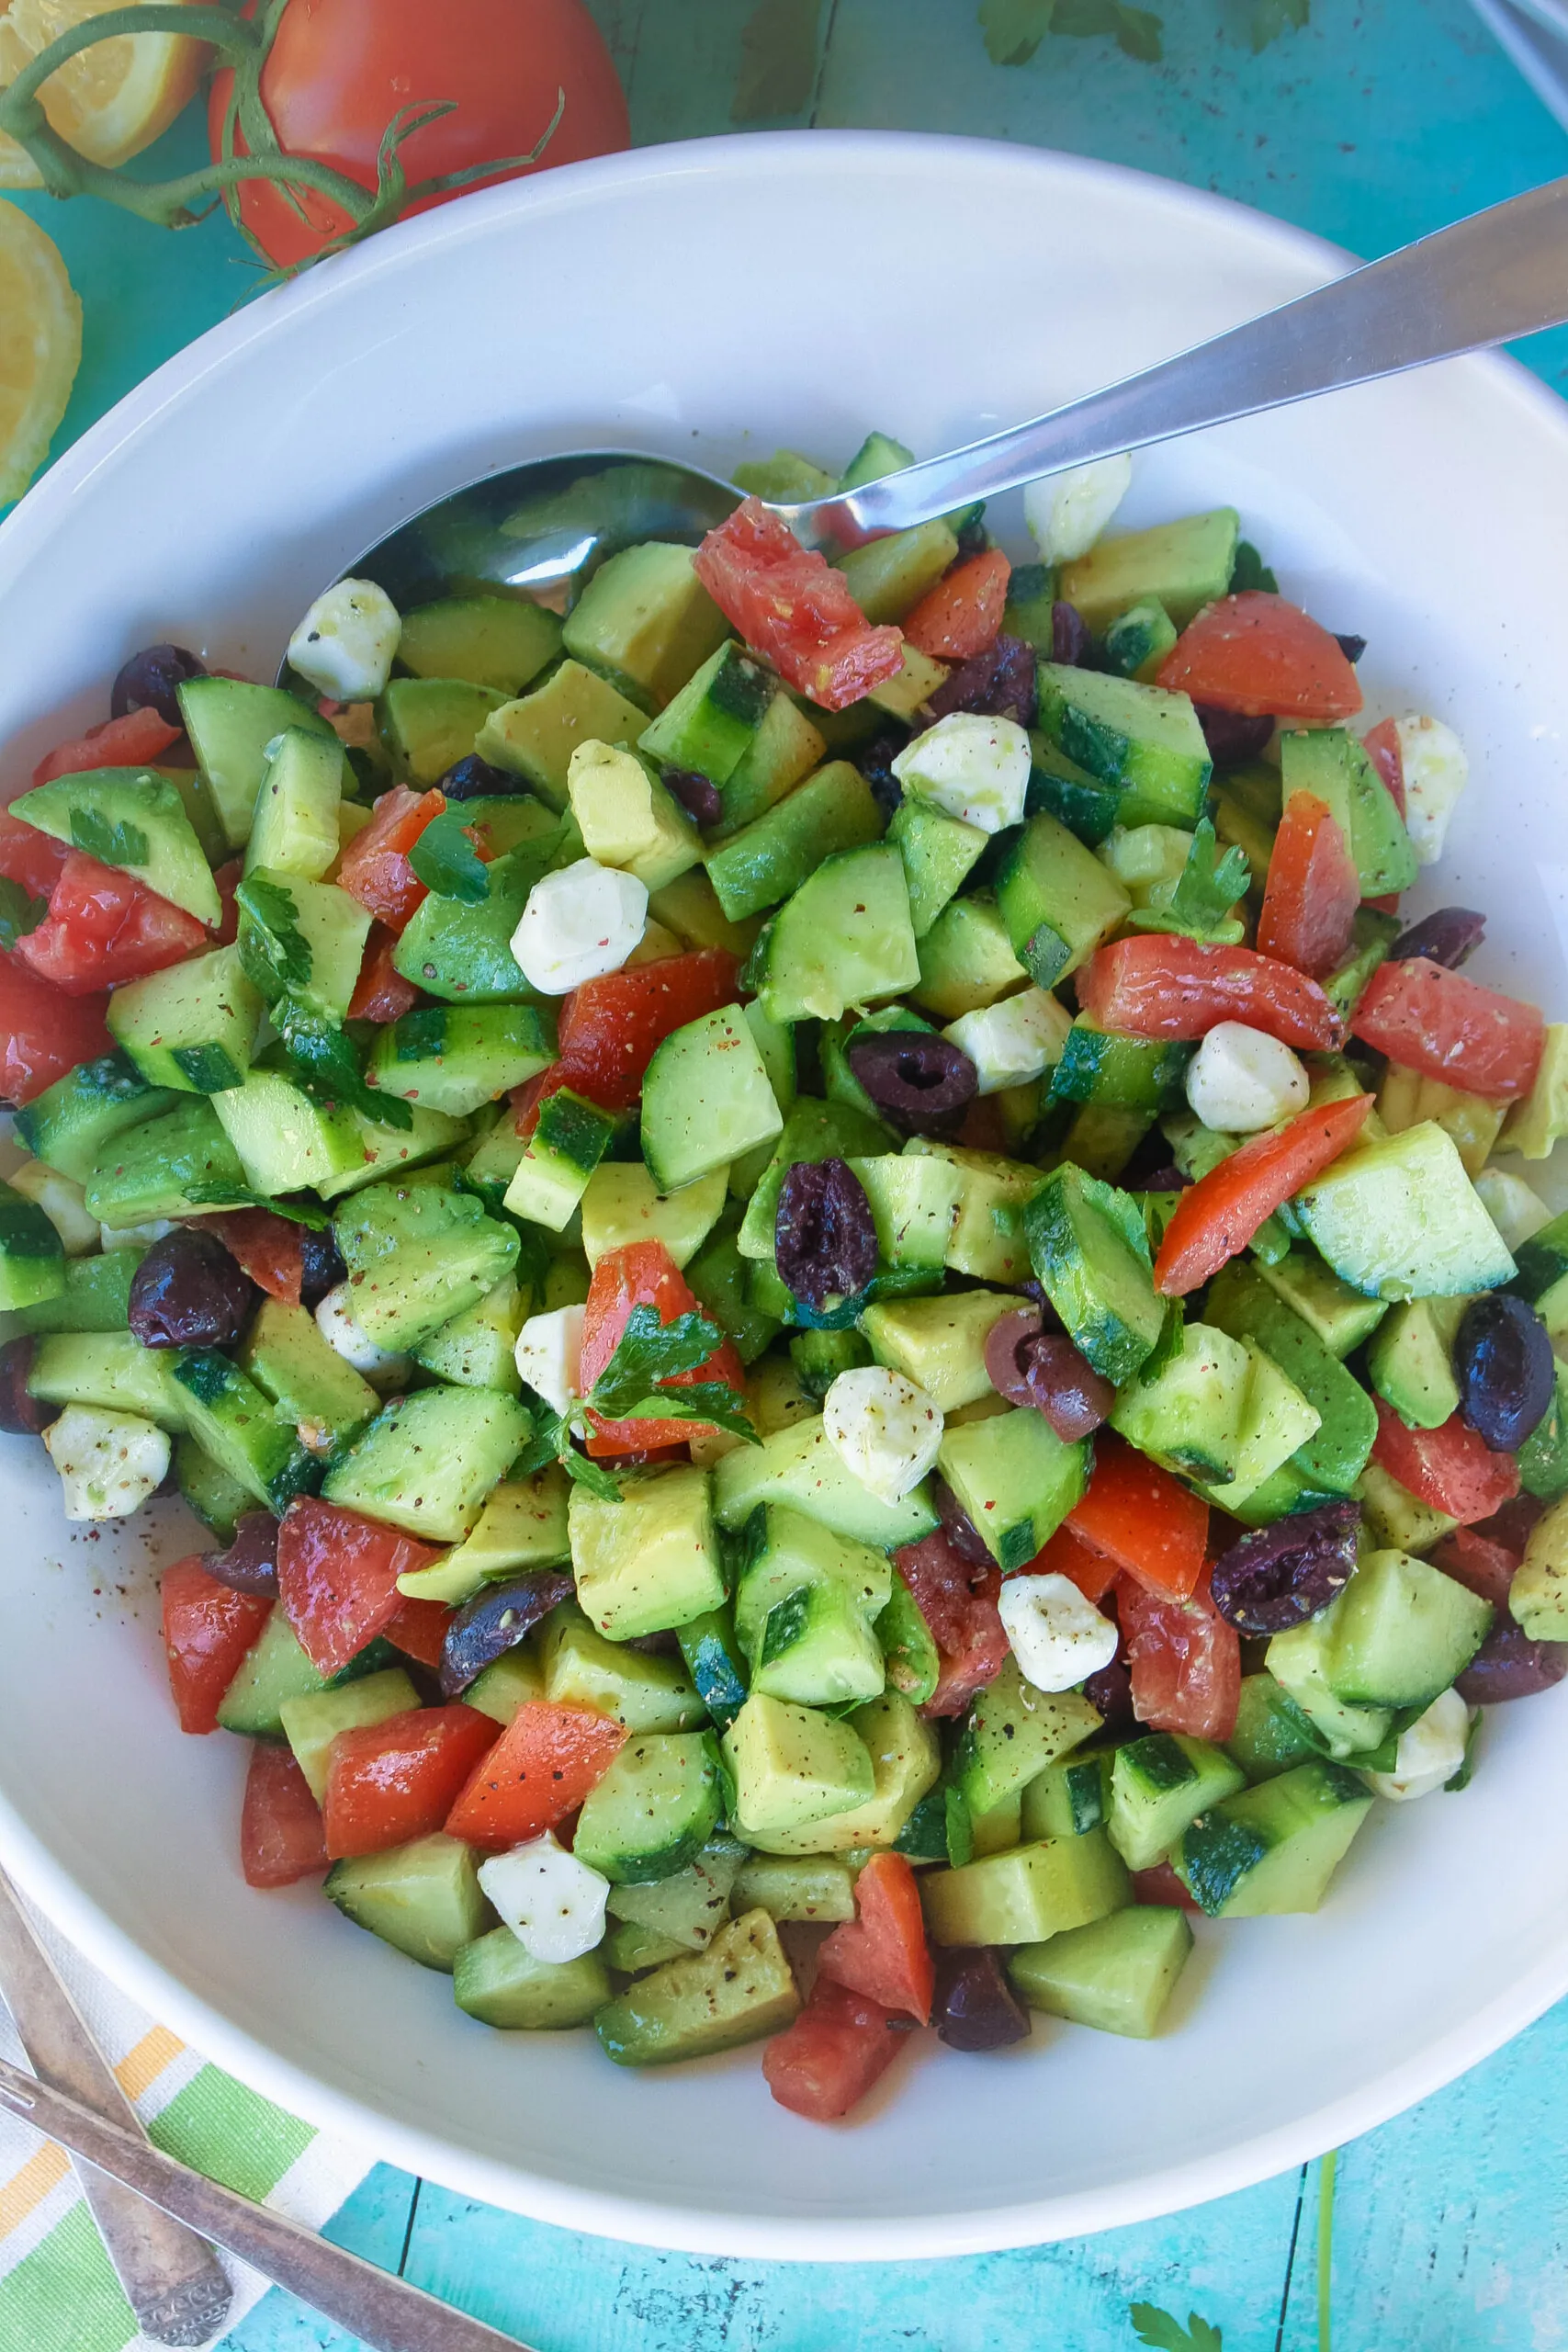 Cucumber salad with lemony dressing has a great pairing of ingredients and flavors.